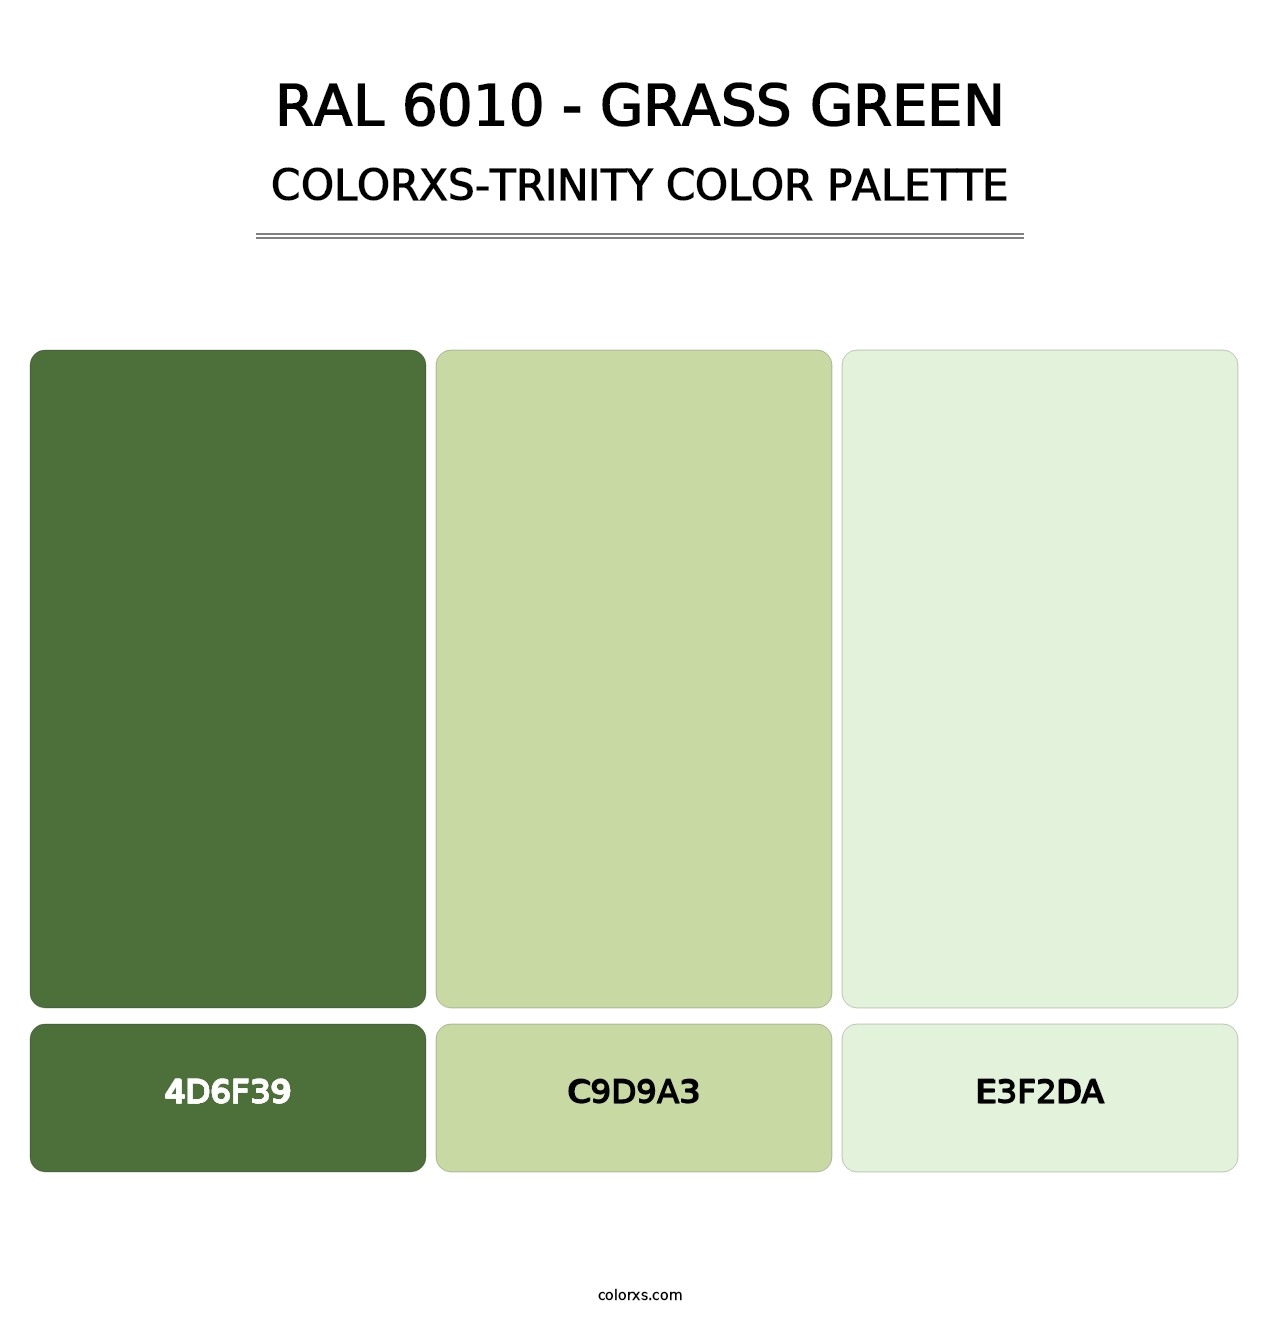 RAL 6010 - Grass Green - Colorxs Trinity Palette